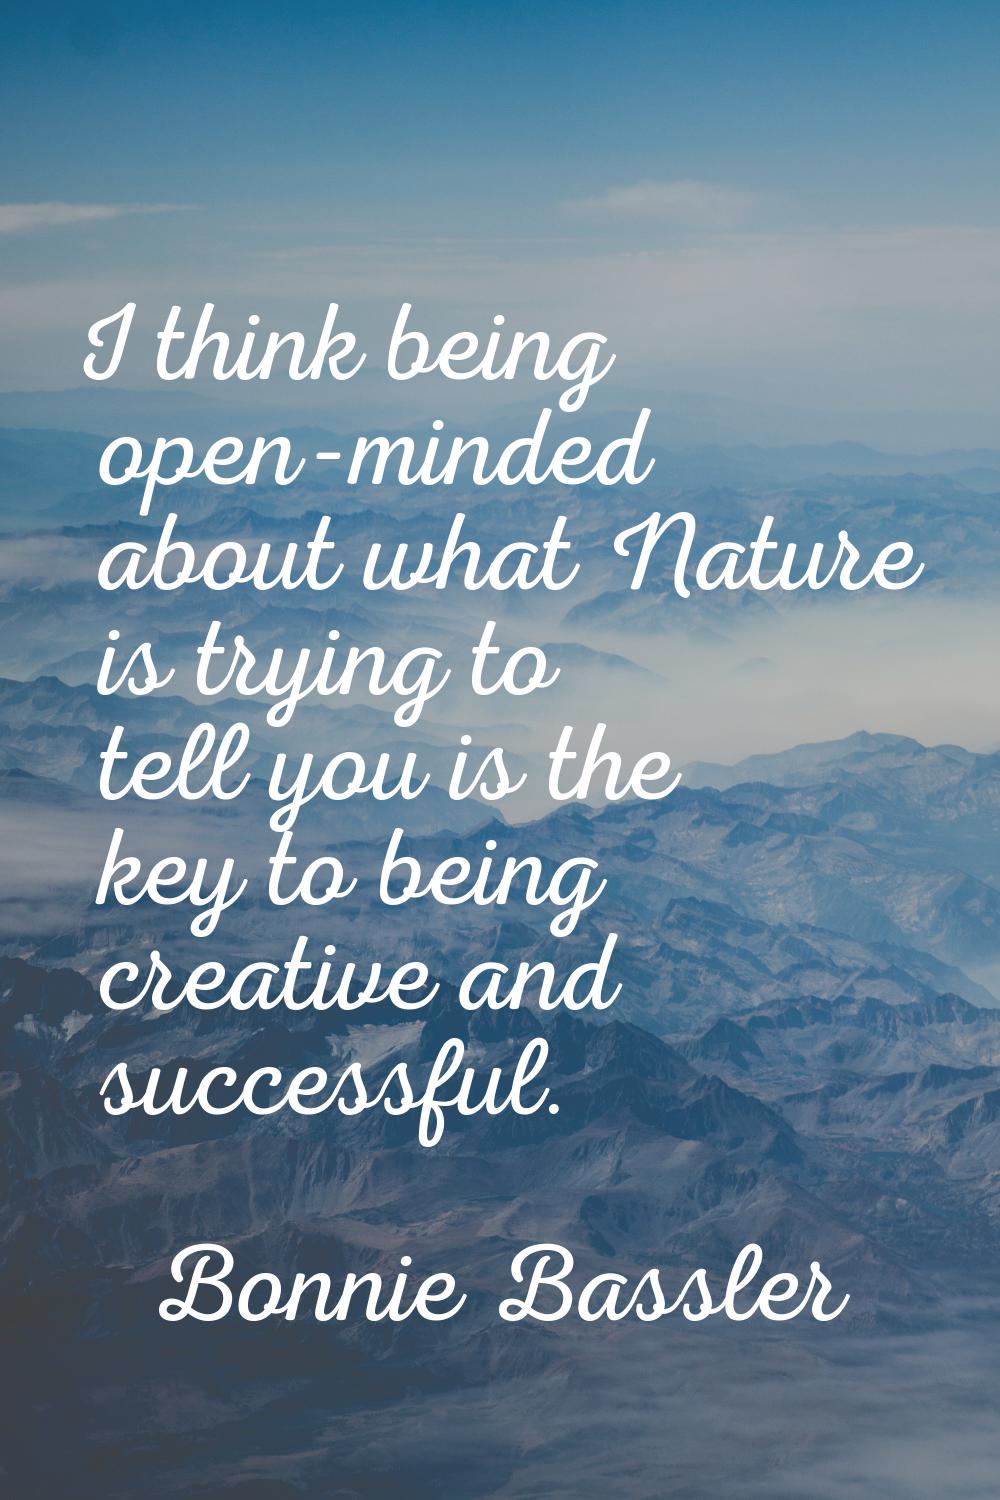 I think being open-minded about what Nature is trying to tell you is the key to being creative and 